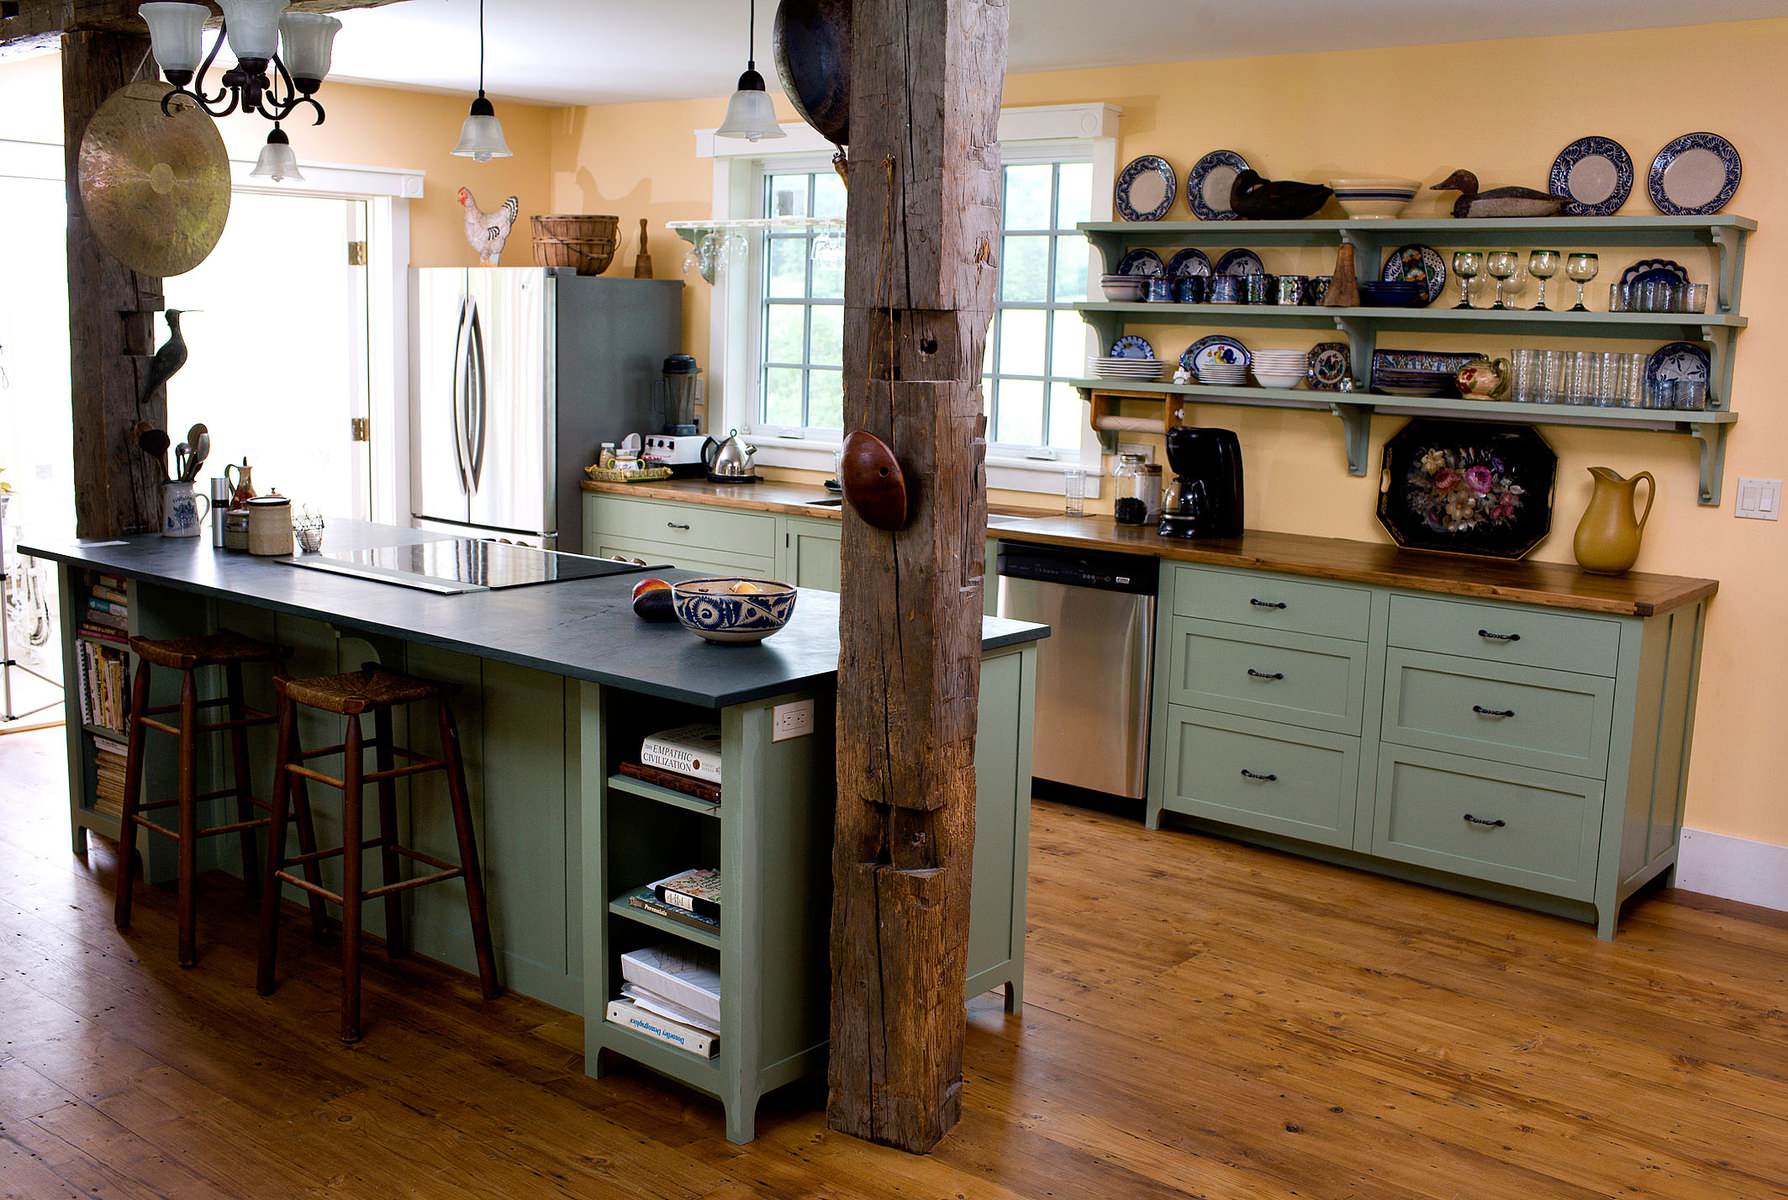 Traditional Farmhouse Kitchen With Green Cabinets and Artwork  Home  kitchens, Traditional farmhouse kitchen, Green kitchen cabinets